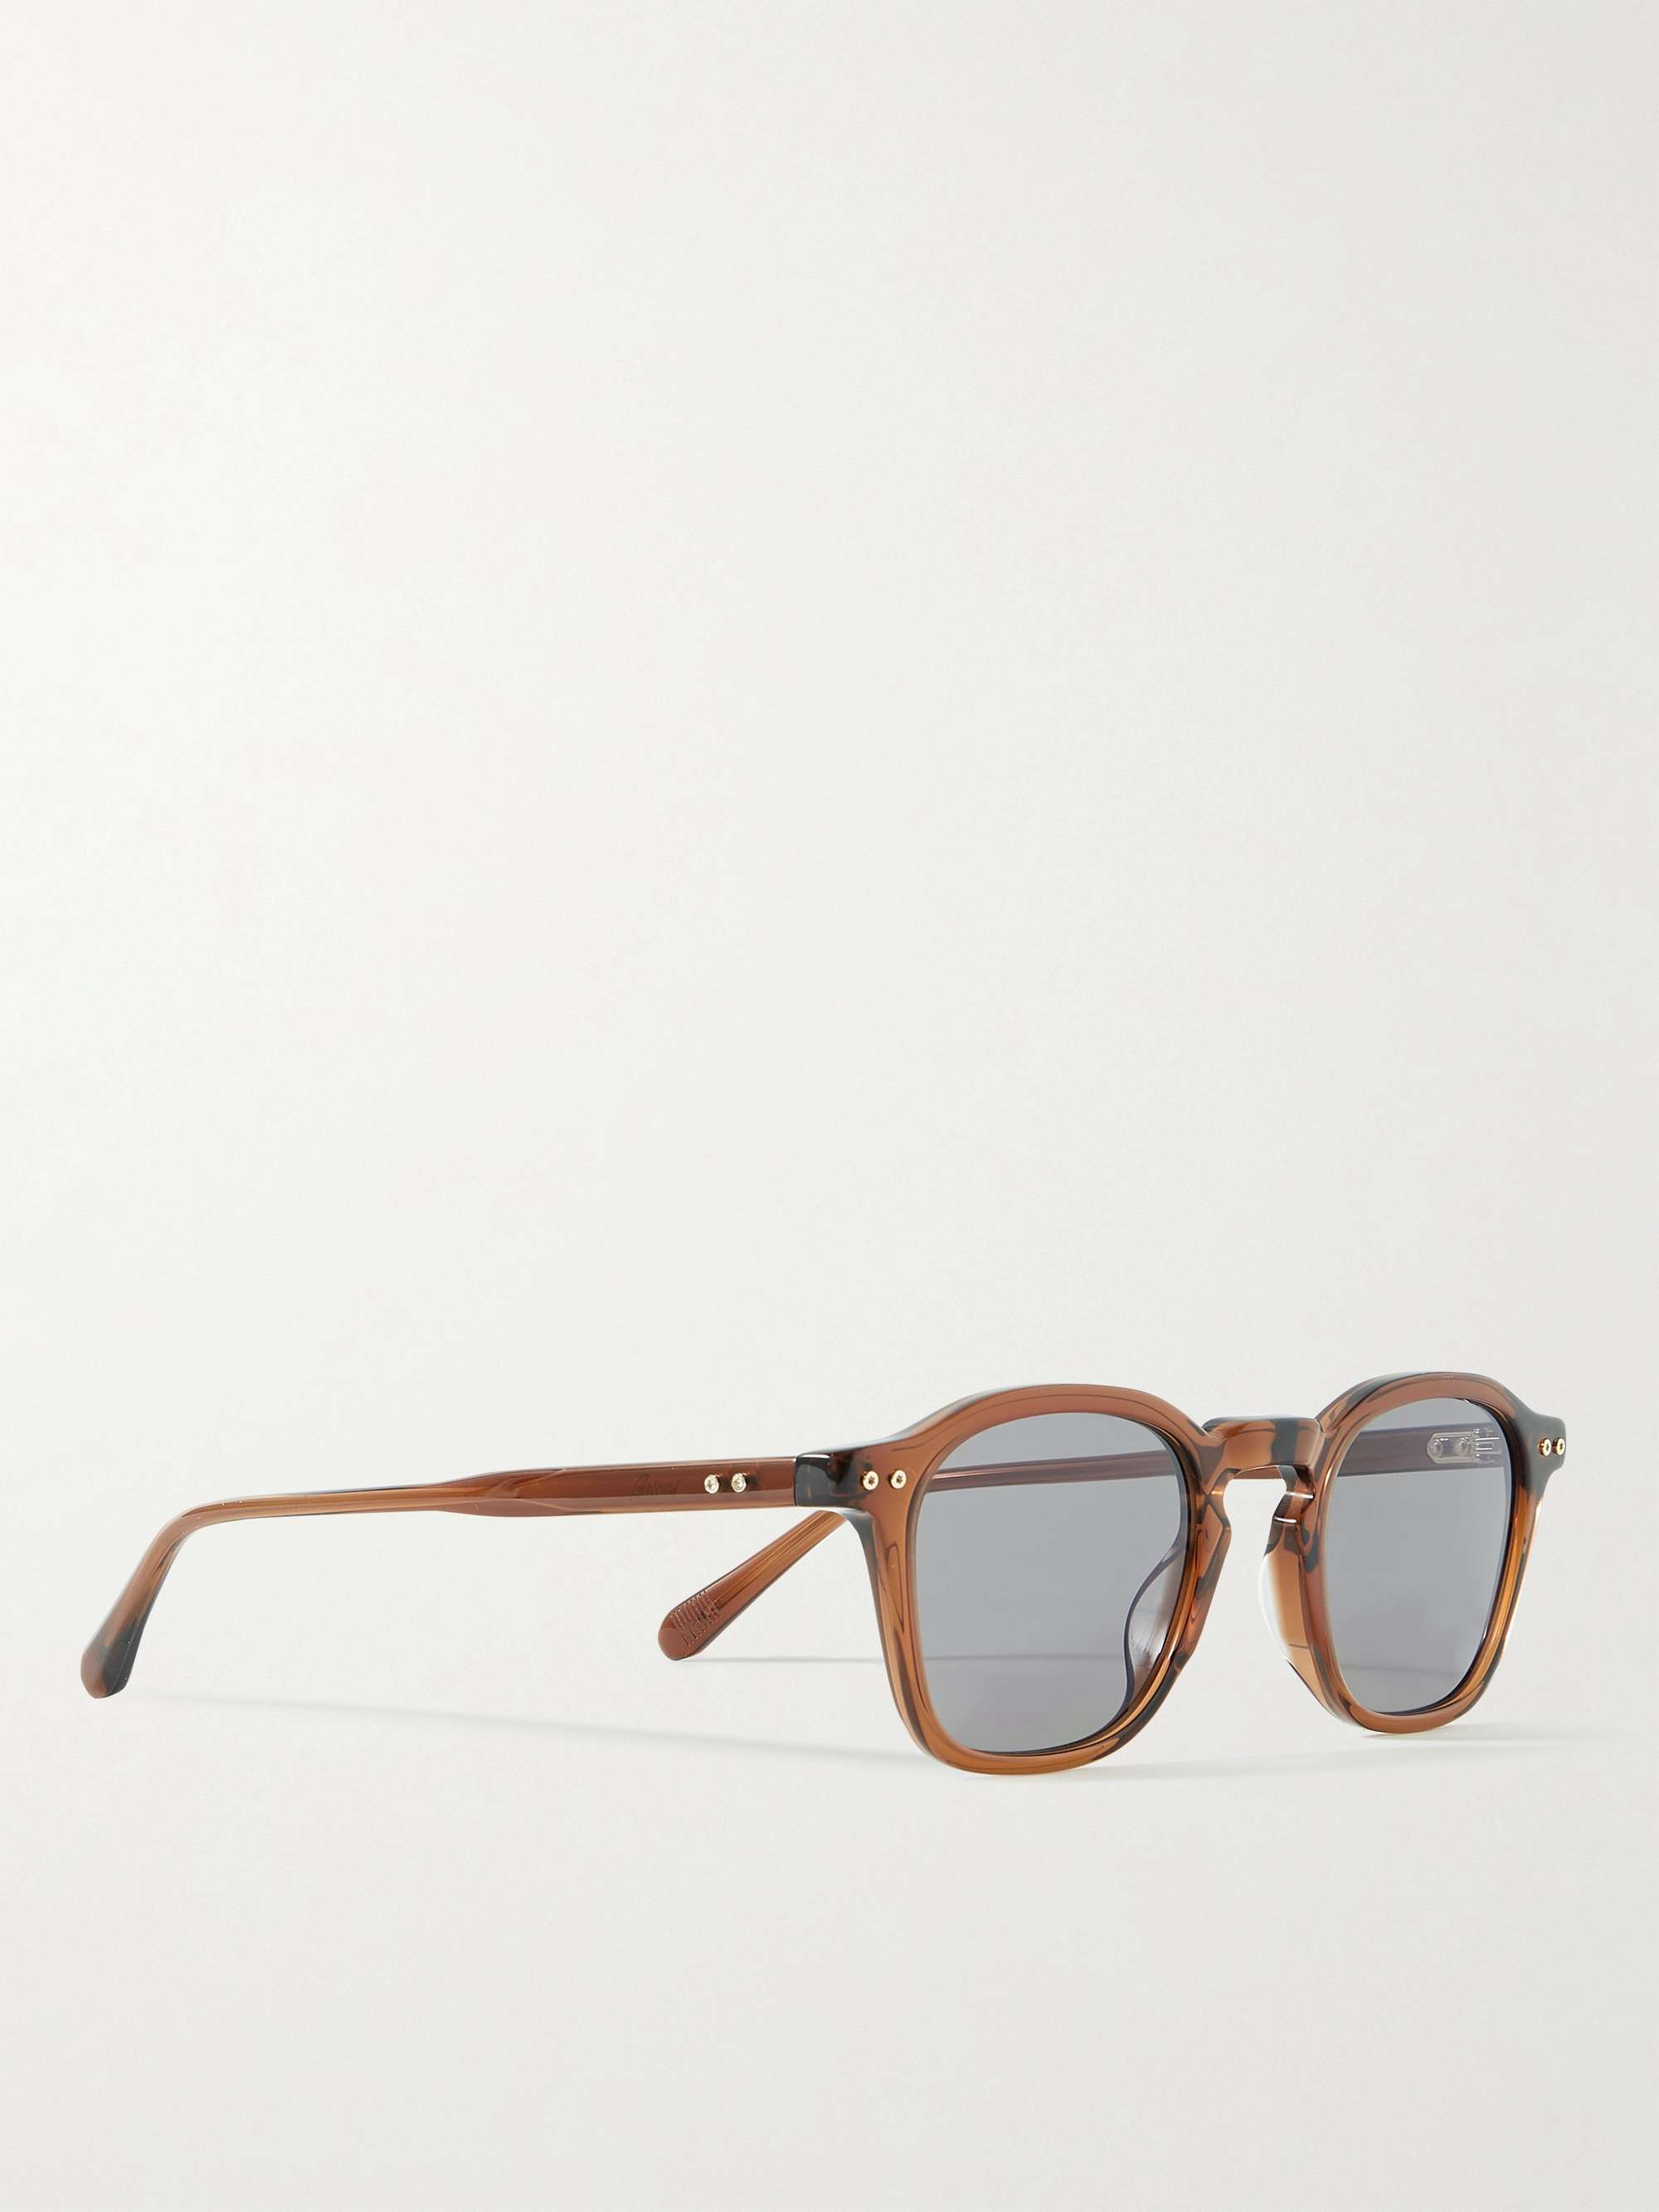 BRIONI Convertible D-Frame Acetate and Gold-Tone Optical Glasses